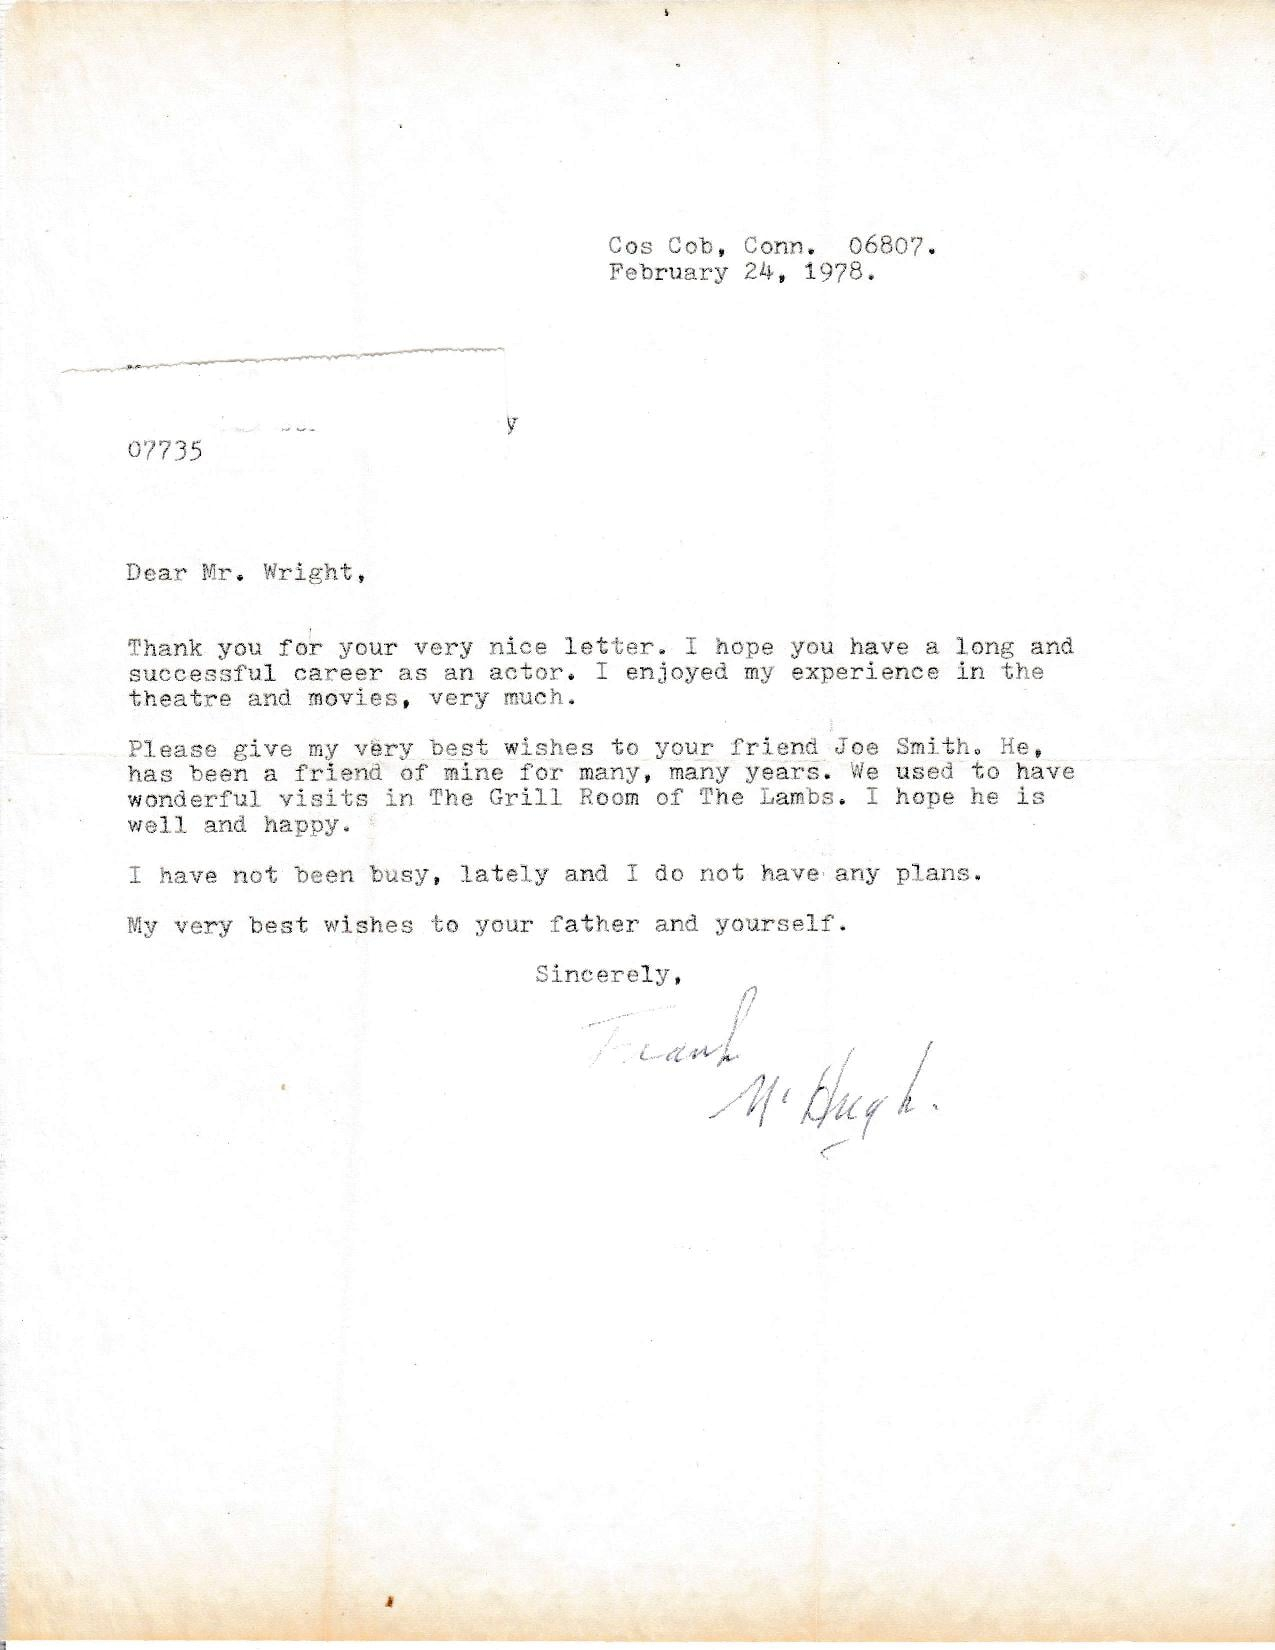 Letter to actor, Michael Townsend Wright.